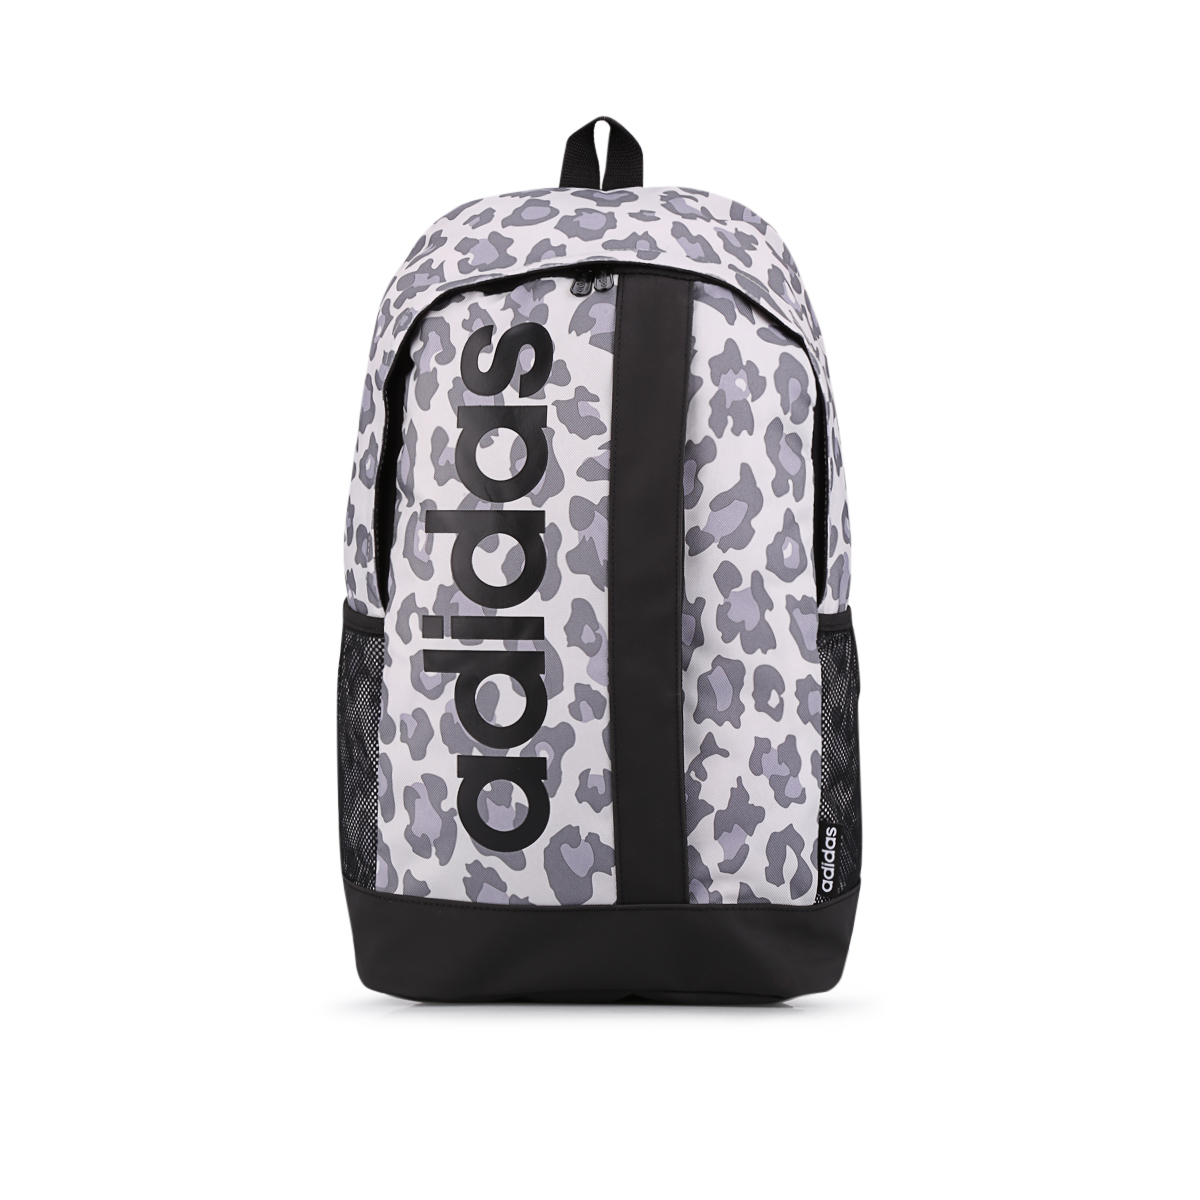 Mochila adidas Linear Leopard,  image number null